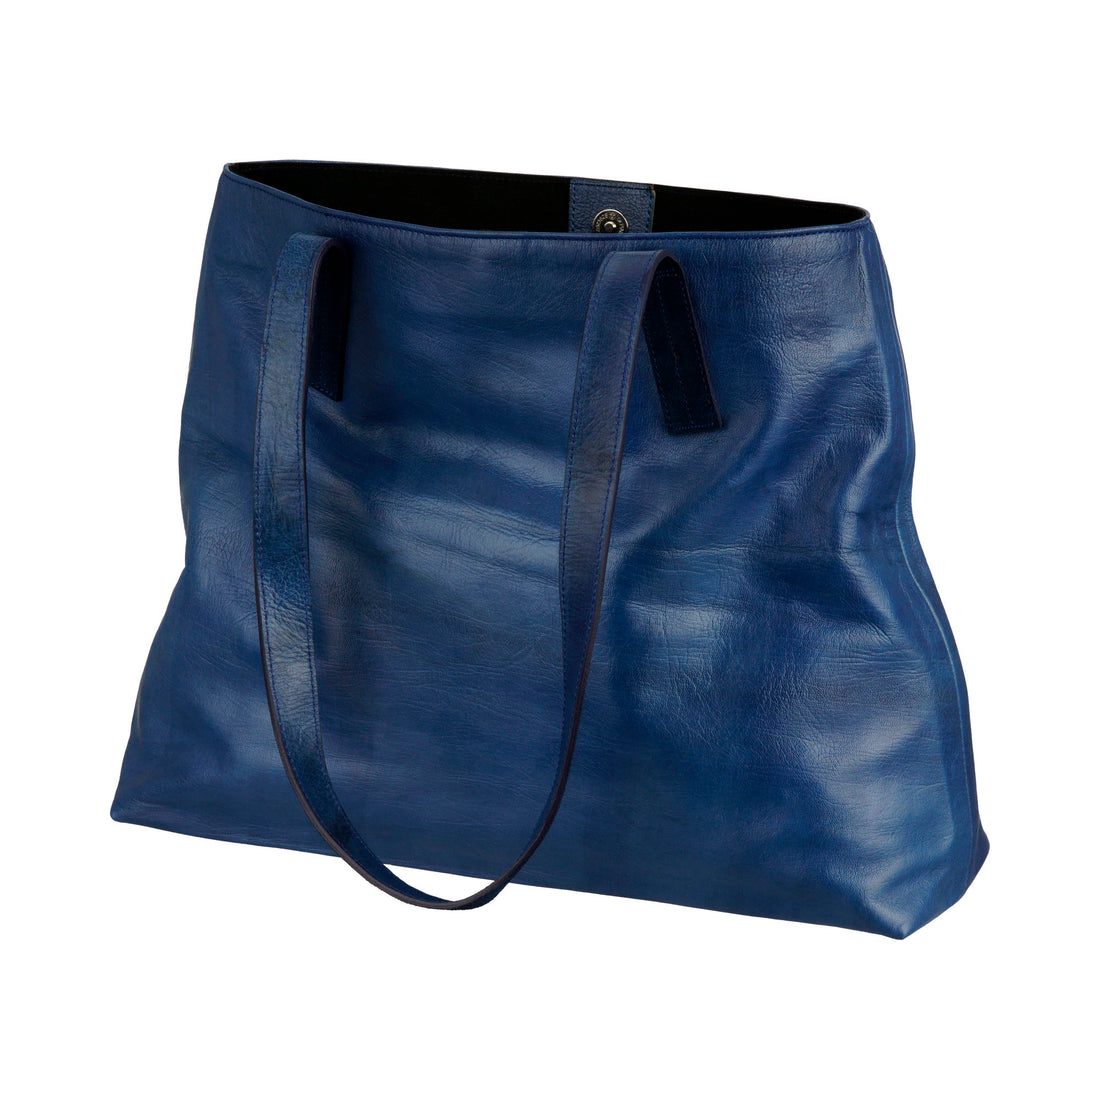 Timeless indigo charm: The rich blue indigo hue of this bag adds a timeless charm, making it a versatile and enduring accessory for any occasion.